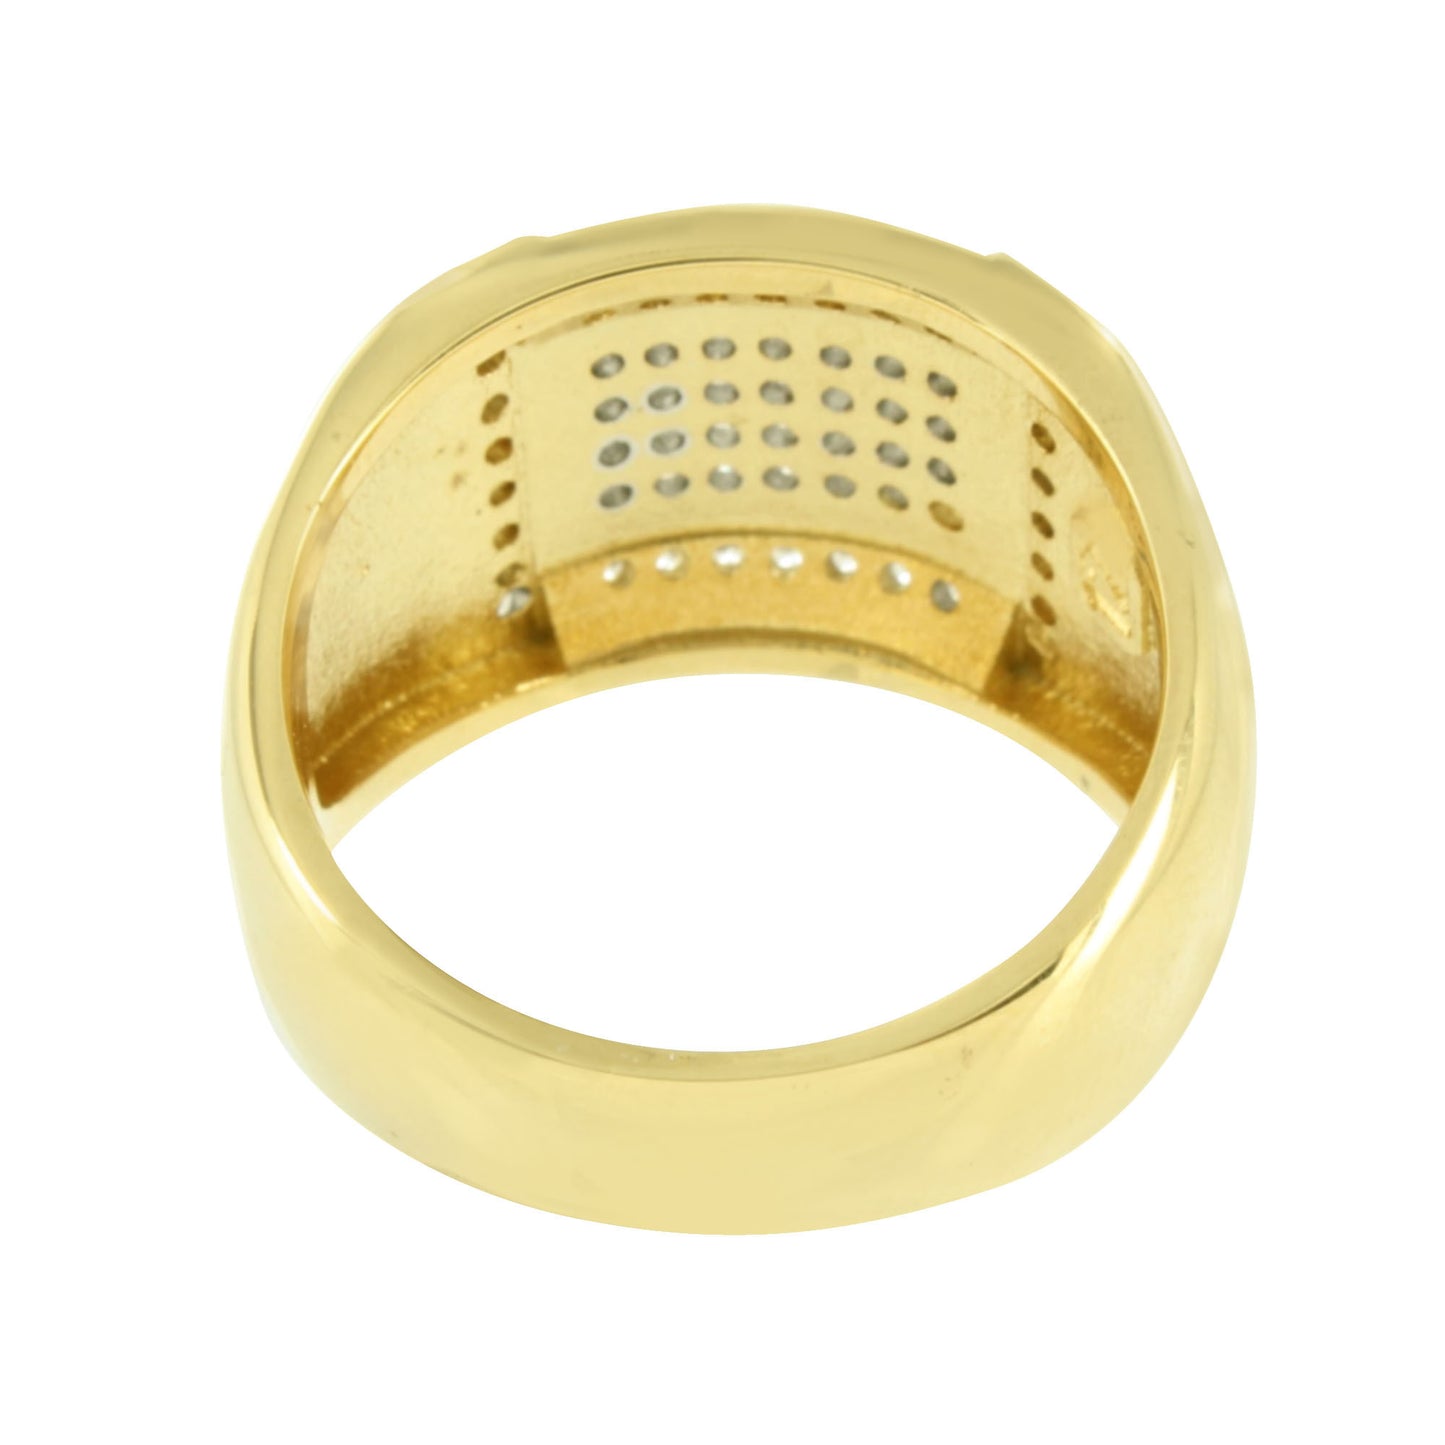 Stainless Steel Mens Ring Simulated Diamonds Gold Finish Wedding Engagement Sale